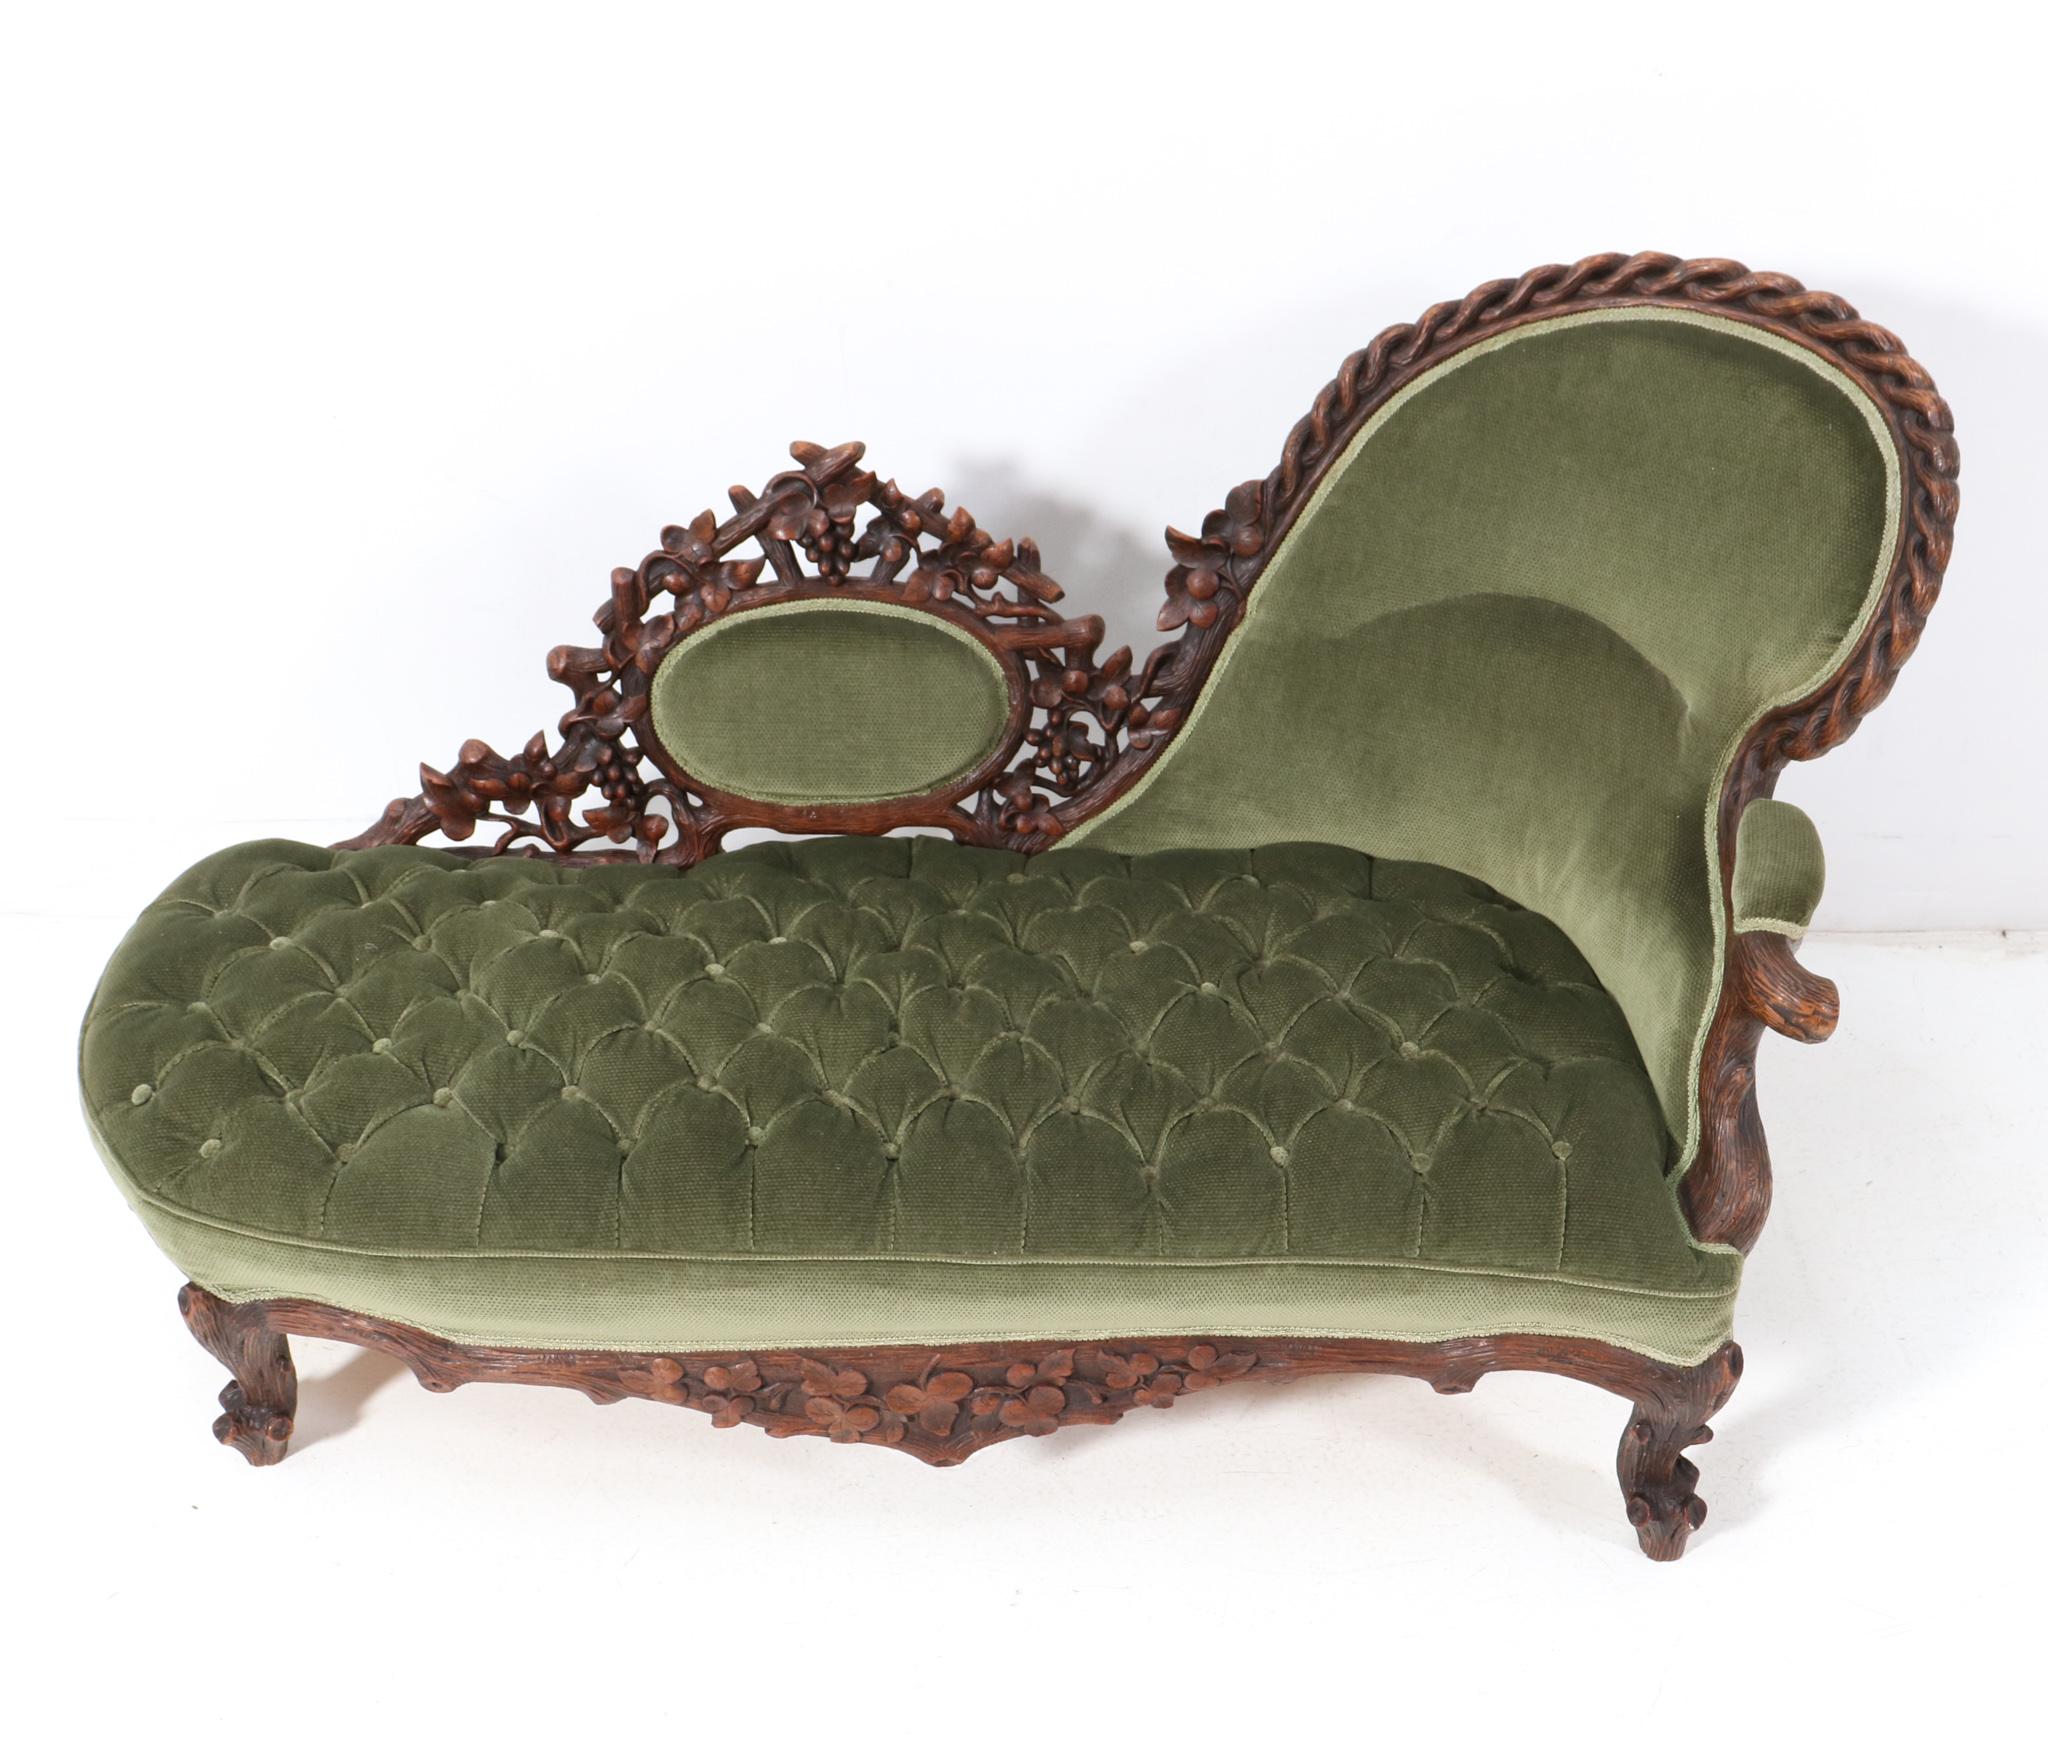 Late 19th Century Walnut Black Forest Chaise Longue by Matthijs Horrix for Horrix Den Haag, 1890s For Sale